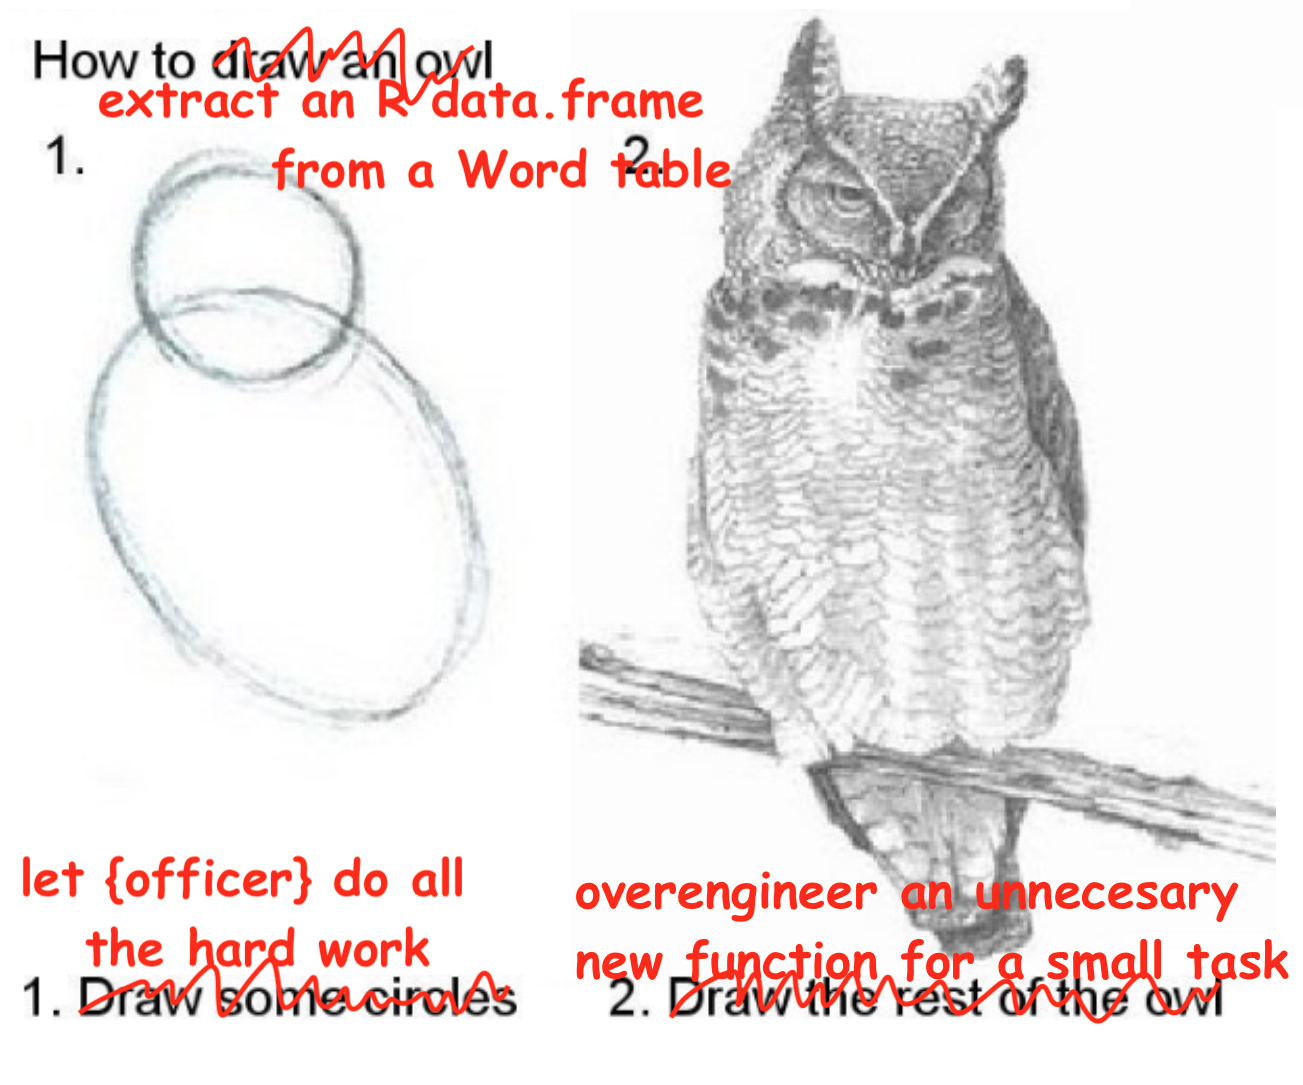 The 'draw the rest of the owl' meme. The title is 'how to draw an owl' but it's been scribble dout and replaced with comic sans text that says 'How to extract an R data.frame from a Word table'. There are two steps: 'draw some circles' and then 'draw the rest of the owl'. The text for these has been replaced with Comic Sans that reads 'let officer do all the hard work' and then 'overengineer an unecessary new function.'